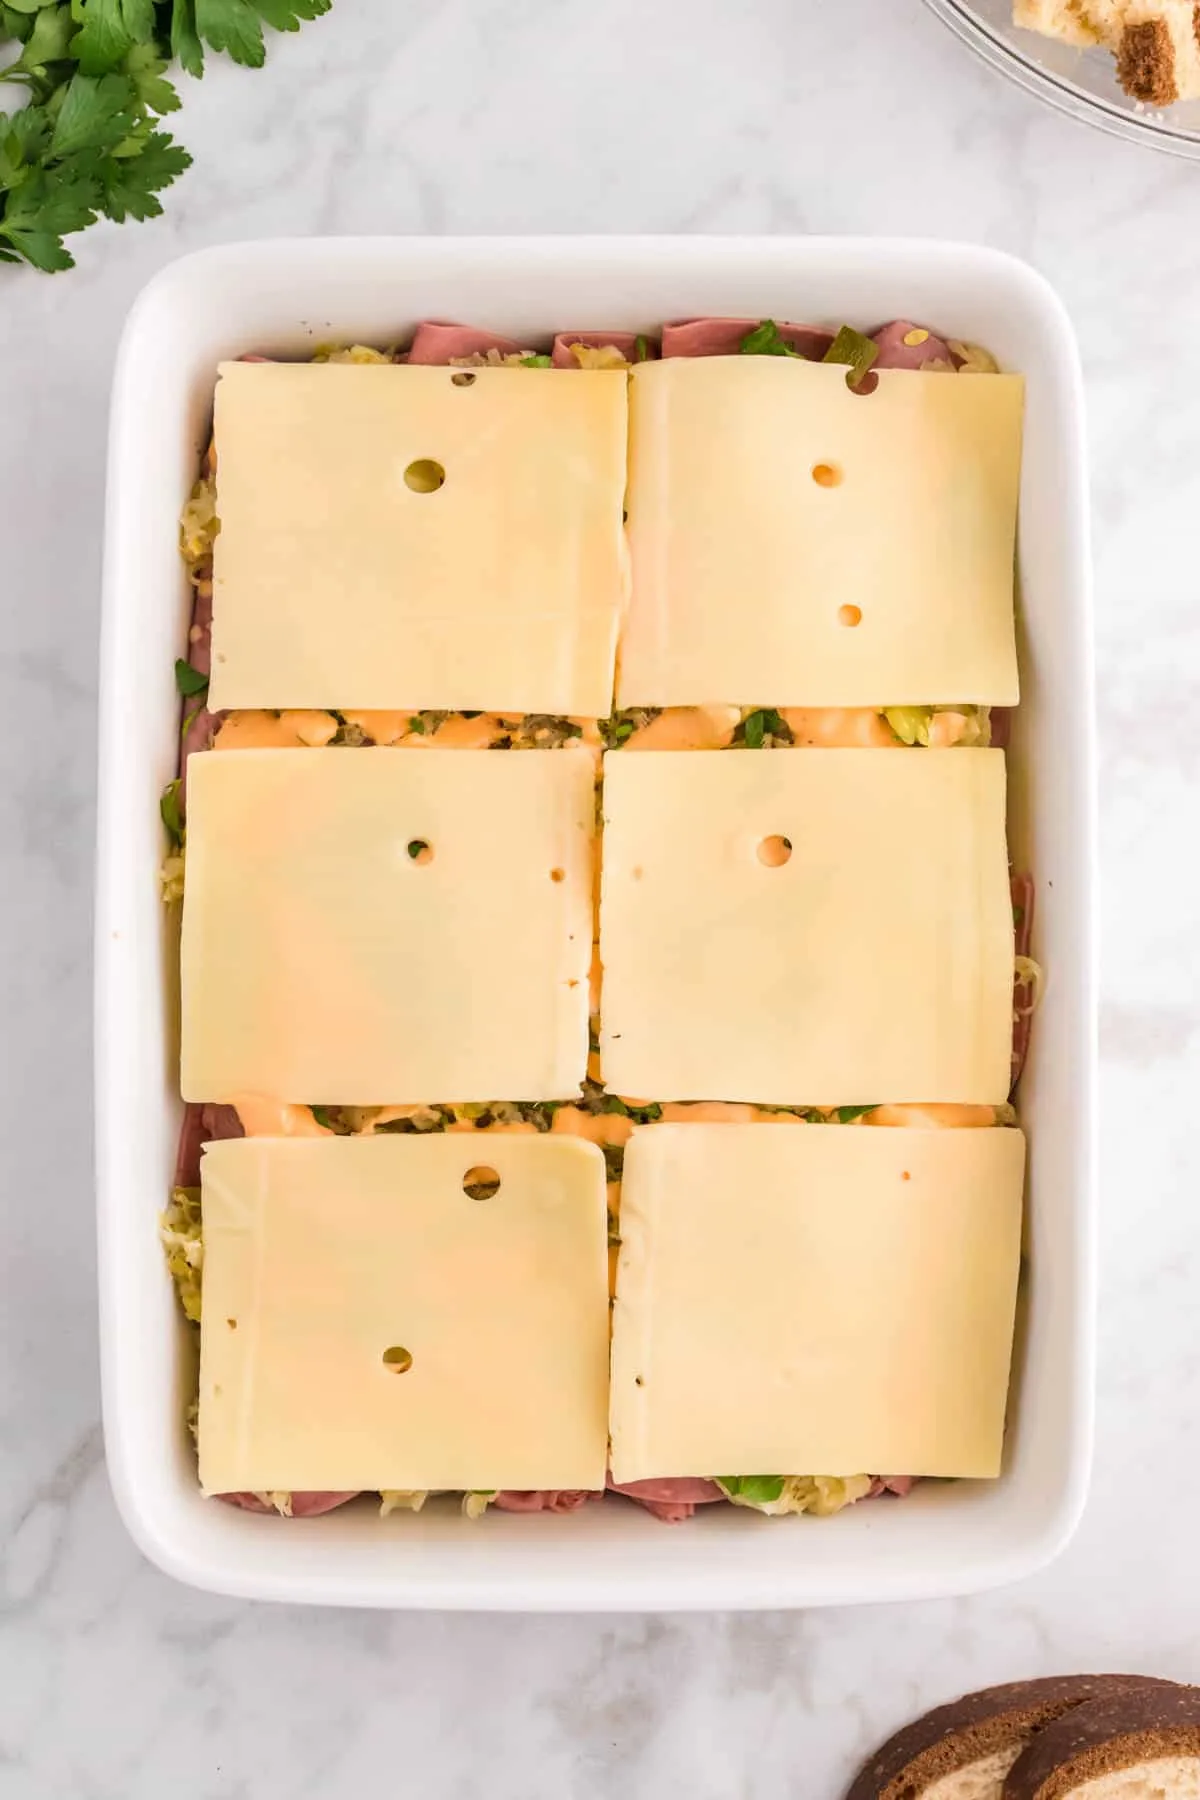 Swiss cheese slices on top of sauerkraut and corned beef in a casserole dish